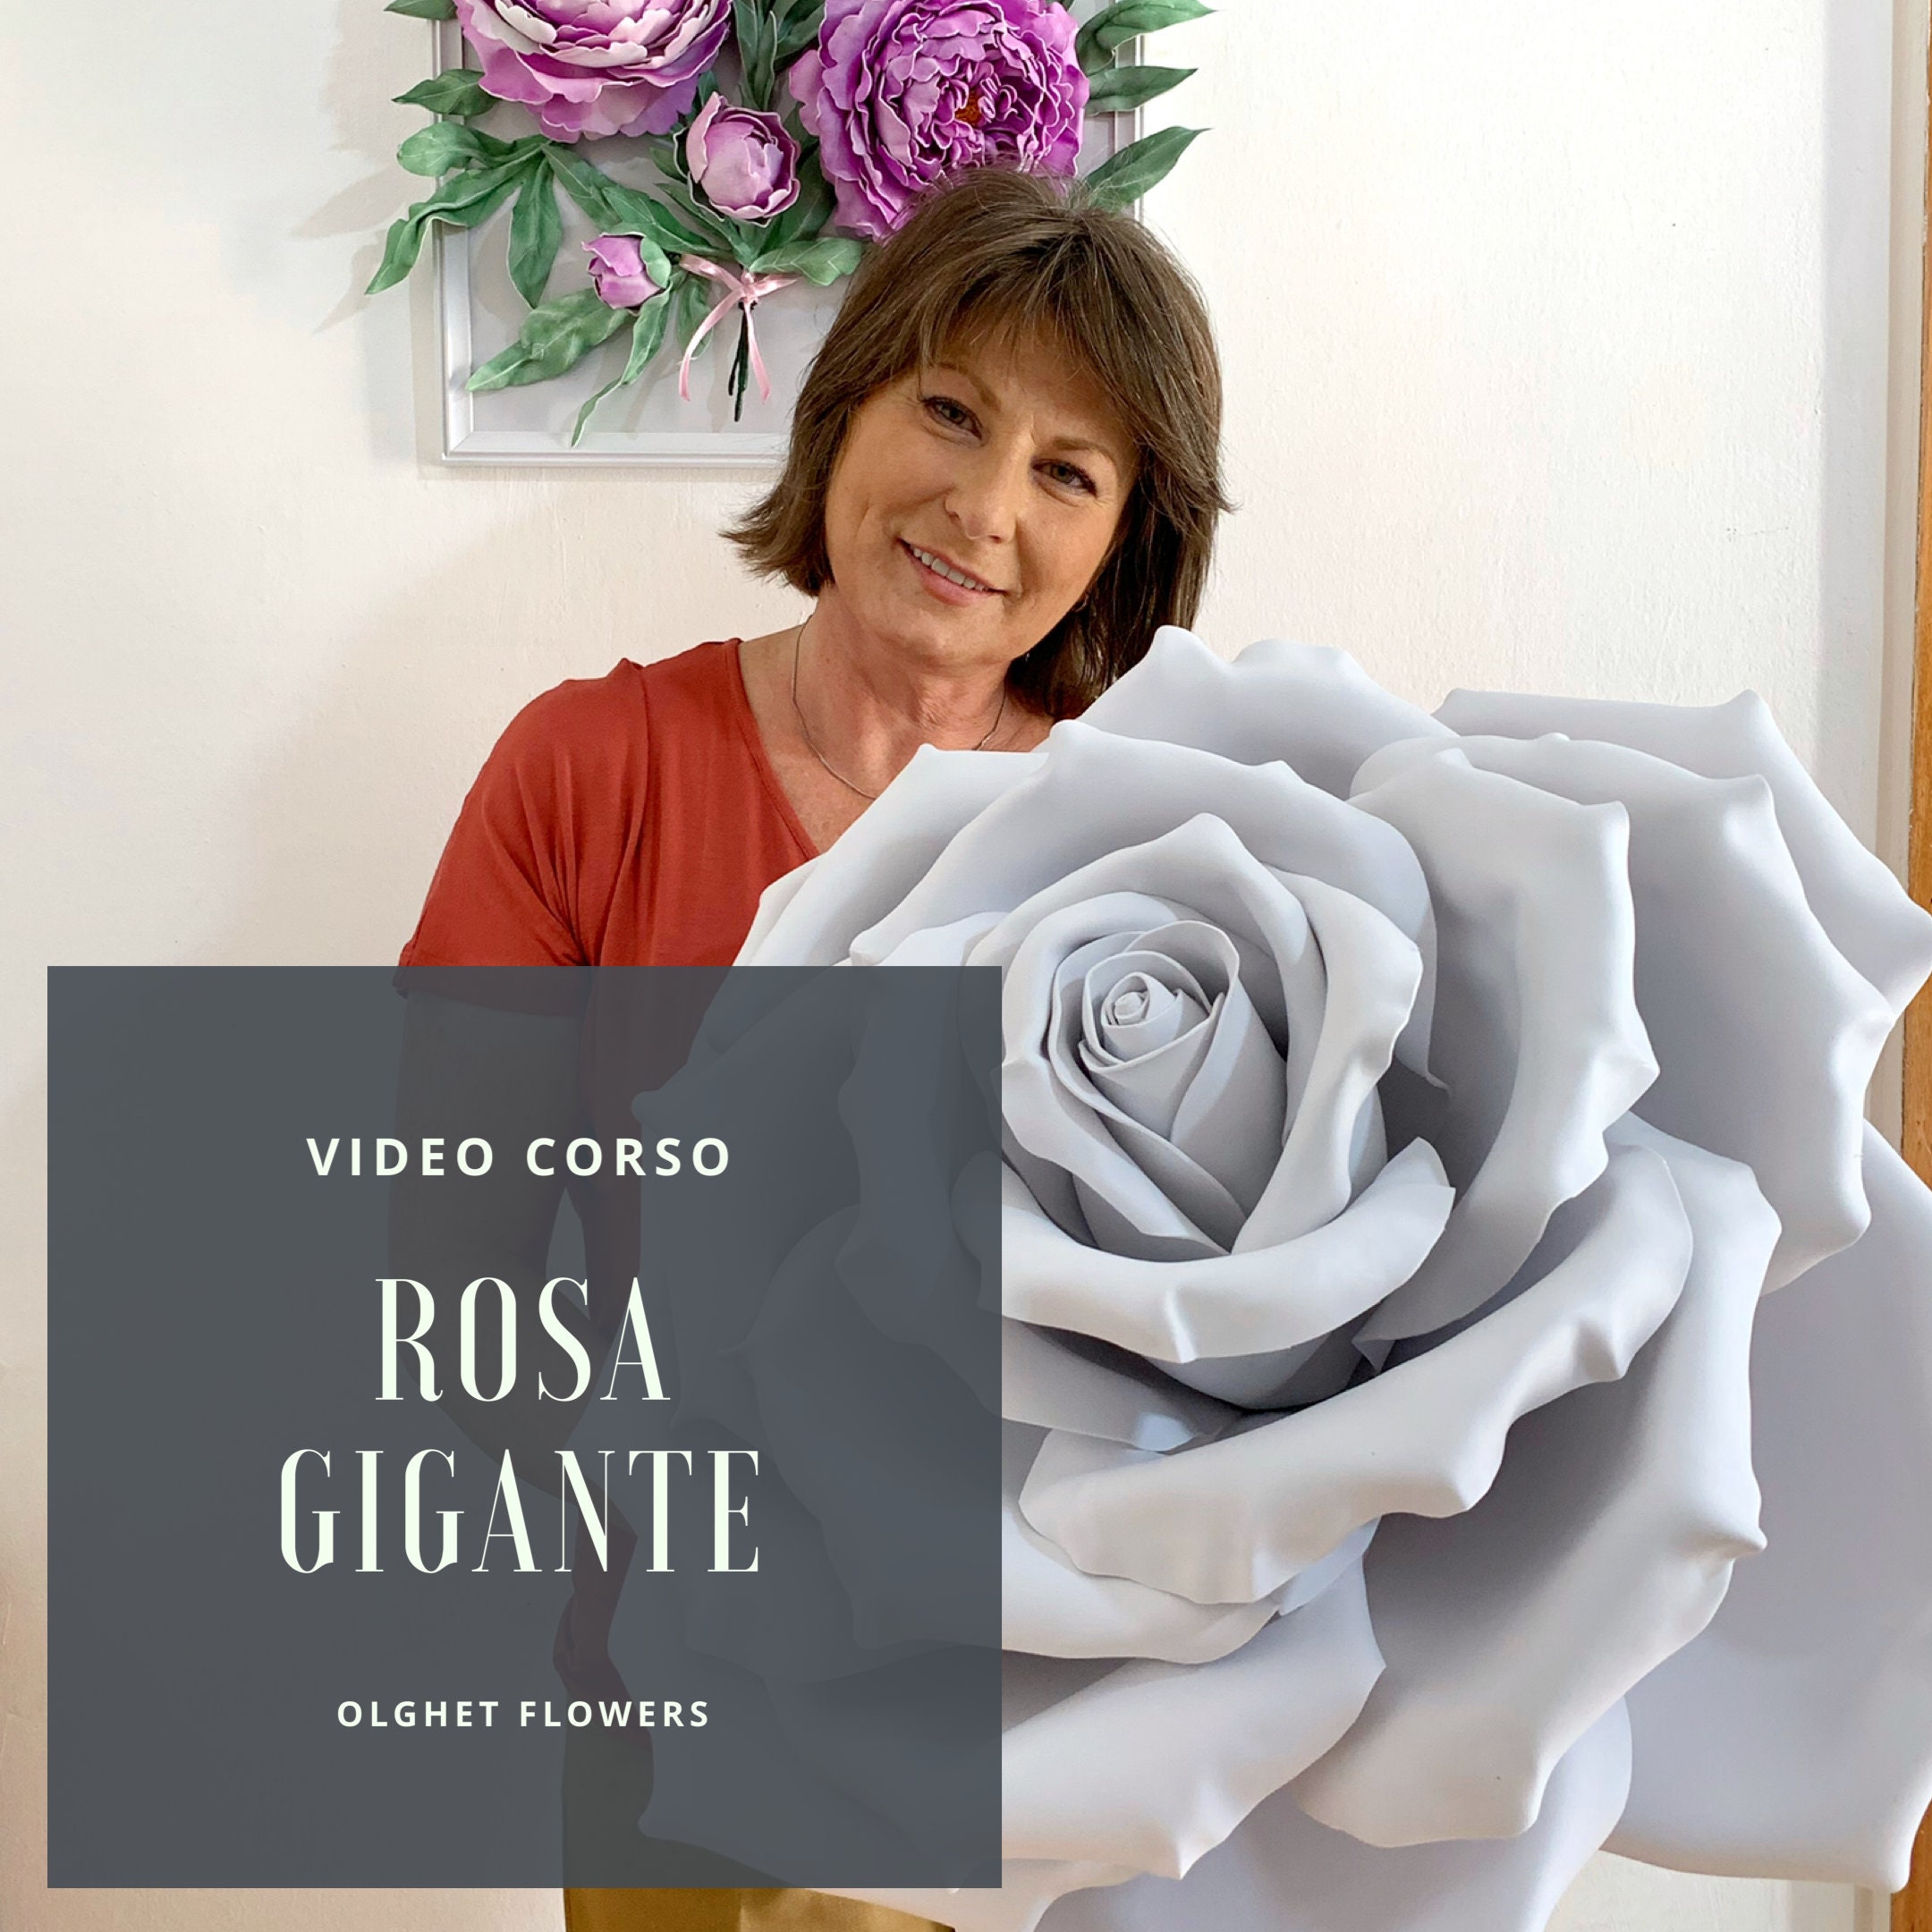 Video Corso Rosa Gigante by Fommy Giant Flowers Tutorial 